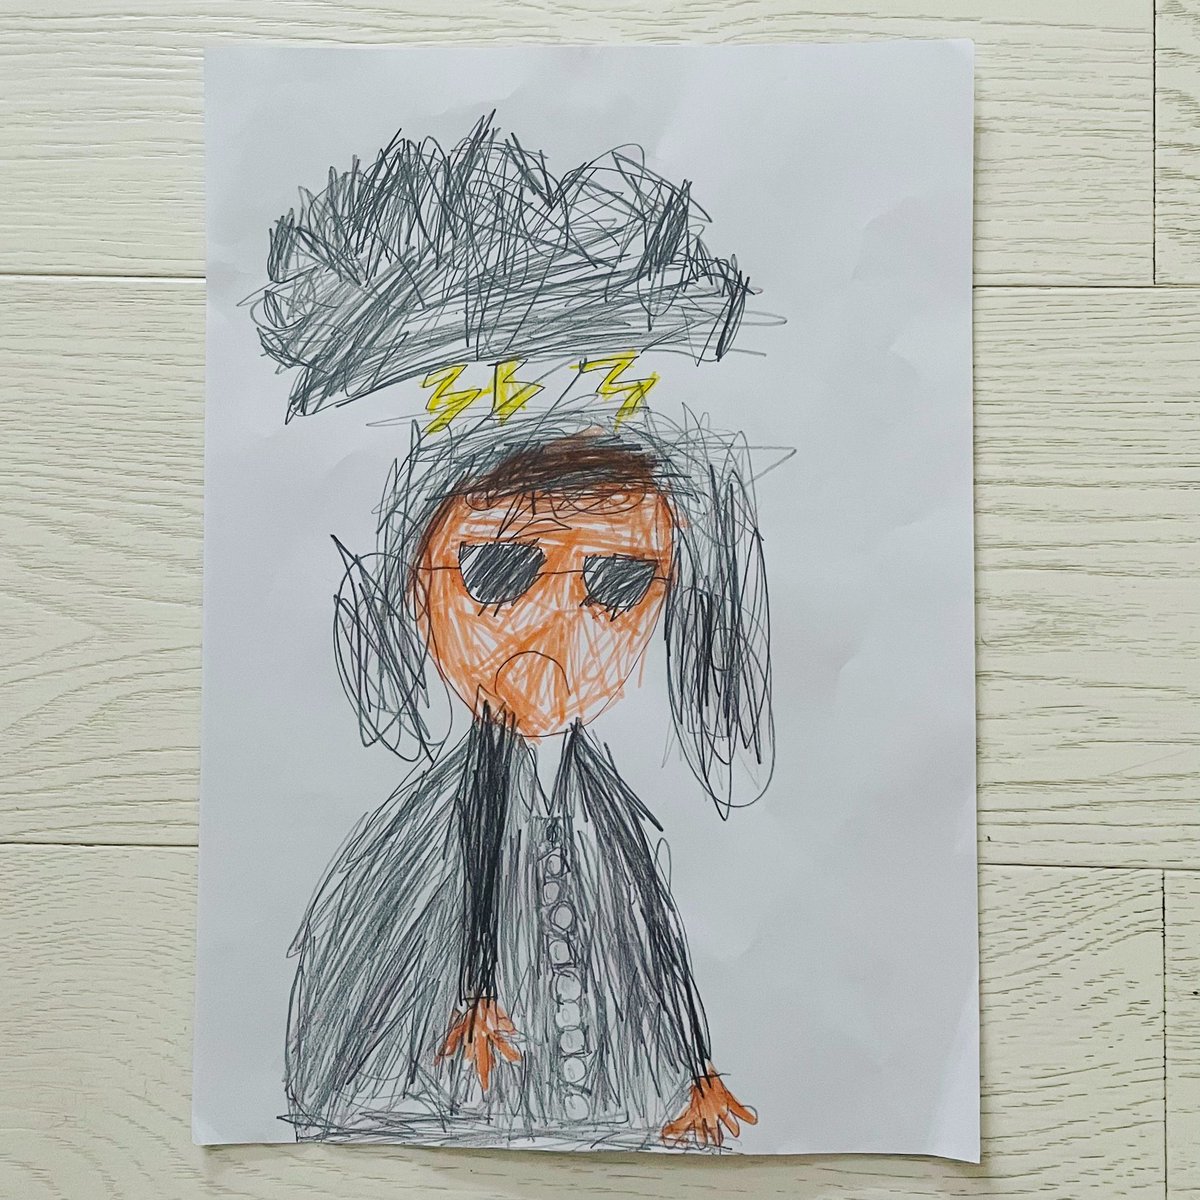 Brody (age 6) came home from school with a drawing he’d done of Delia from the #tomgates books. I laugh to think of what his teachers thought of the work 😂 #hesfine #leastgloomiestchildever @LizPichon #tomgatesbooks